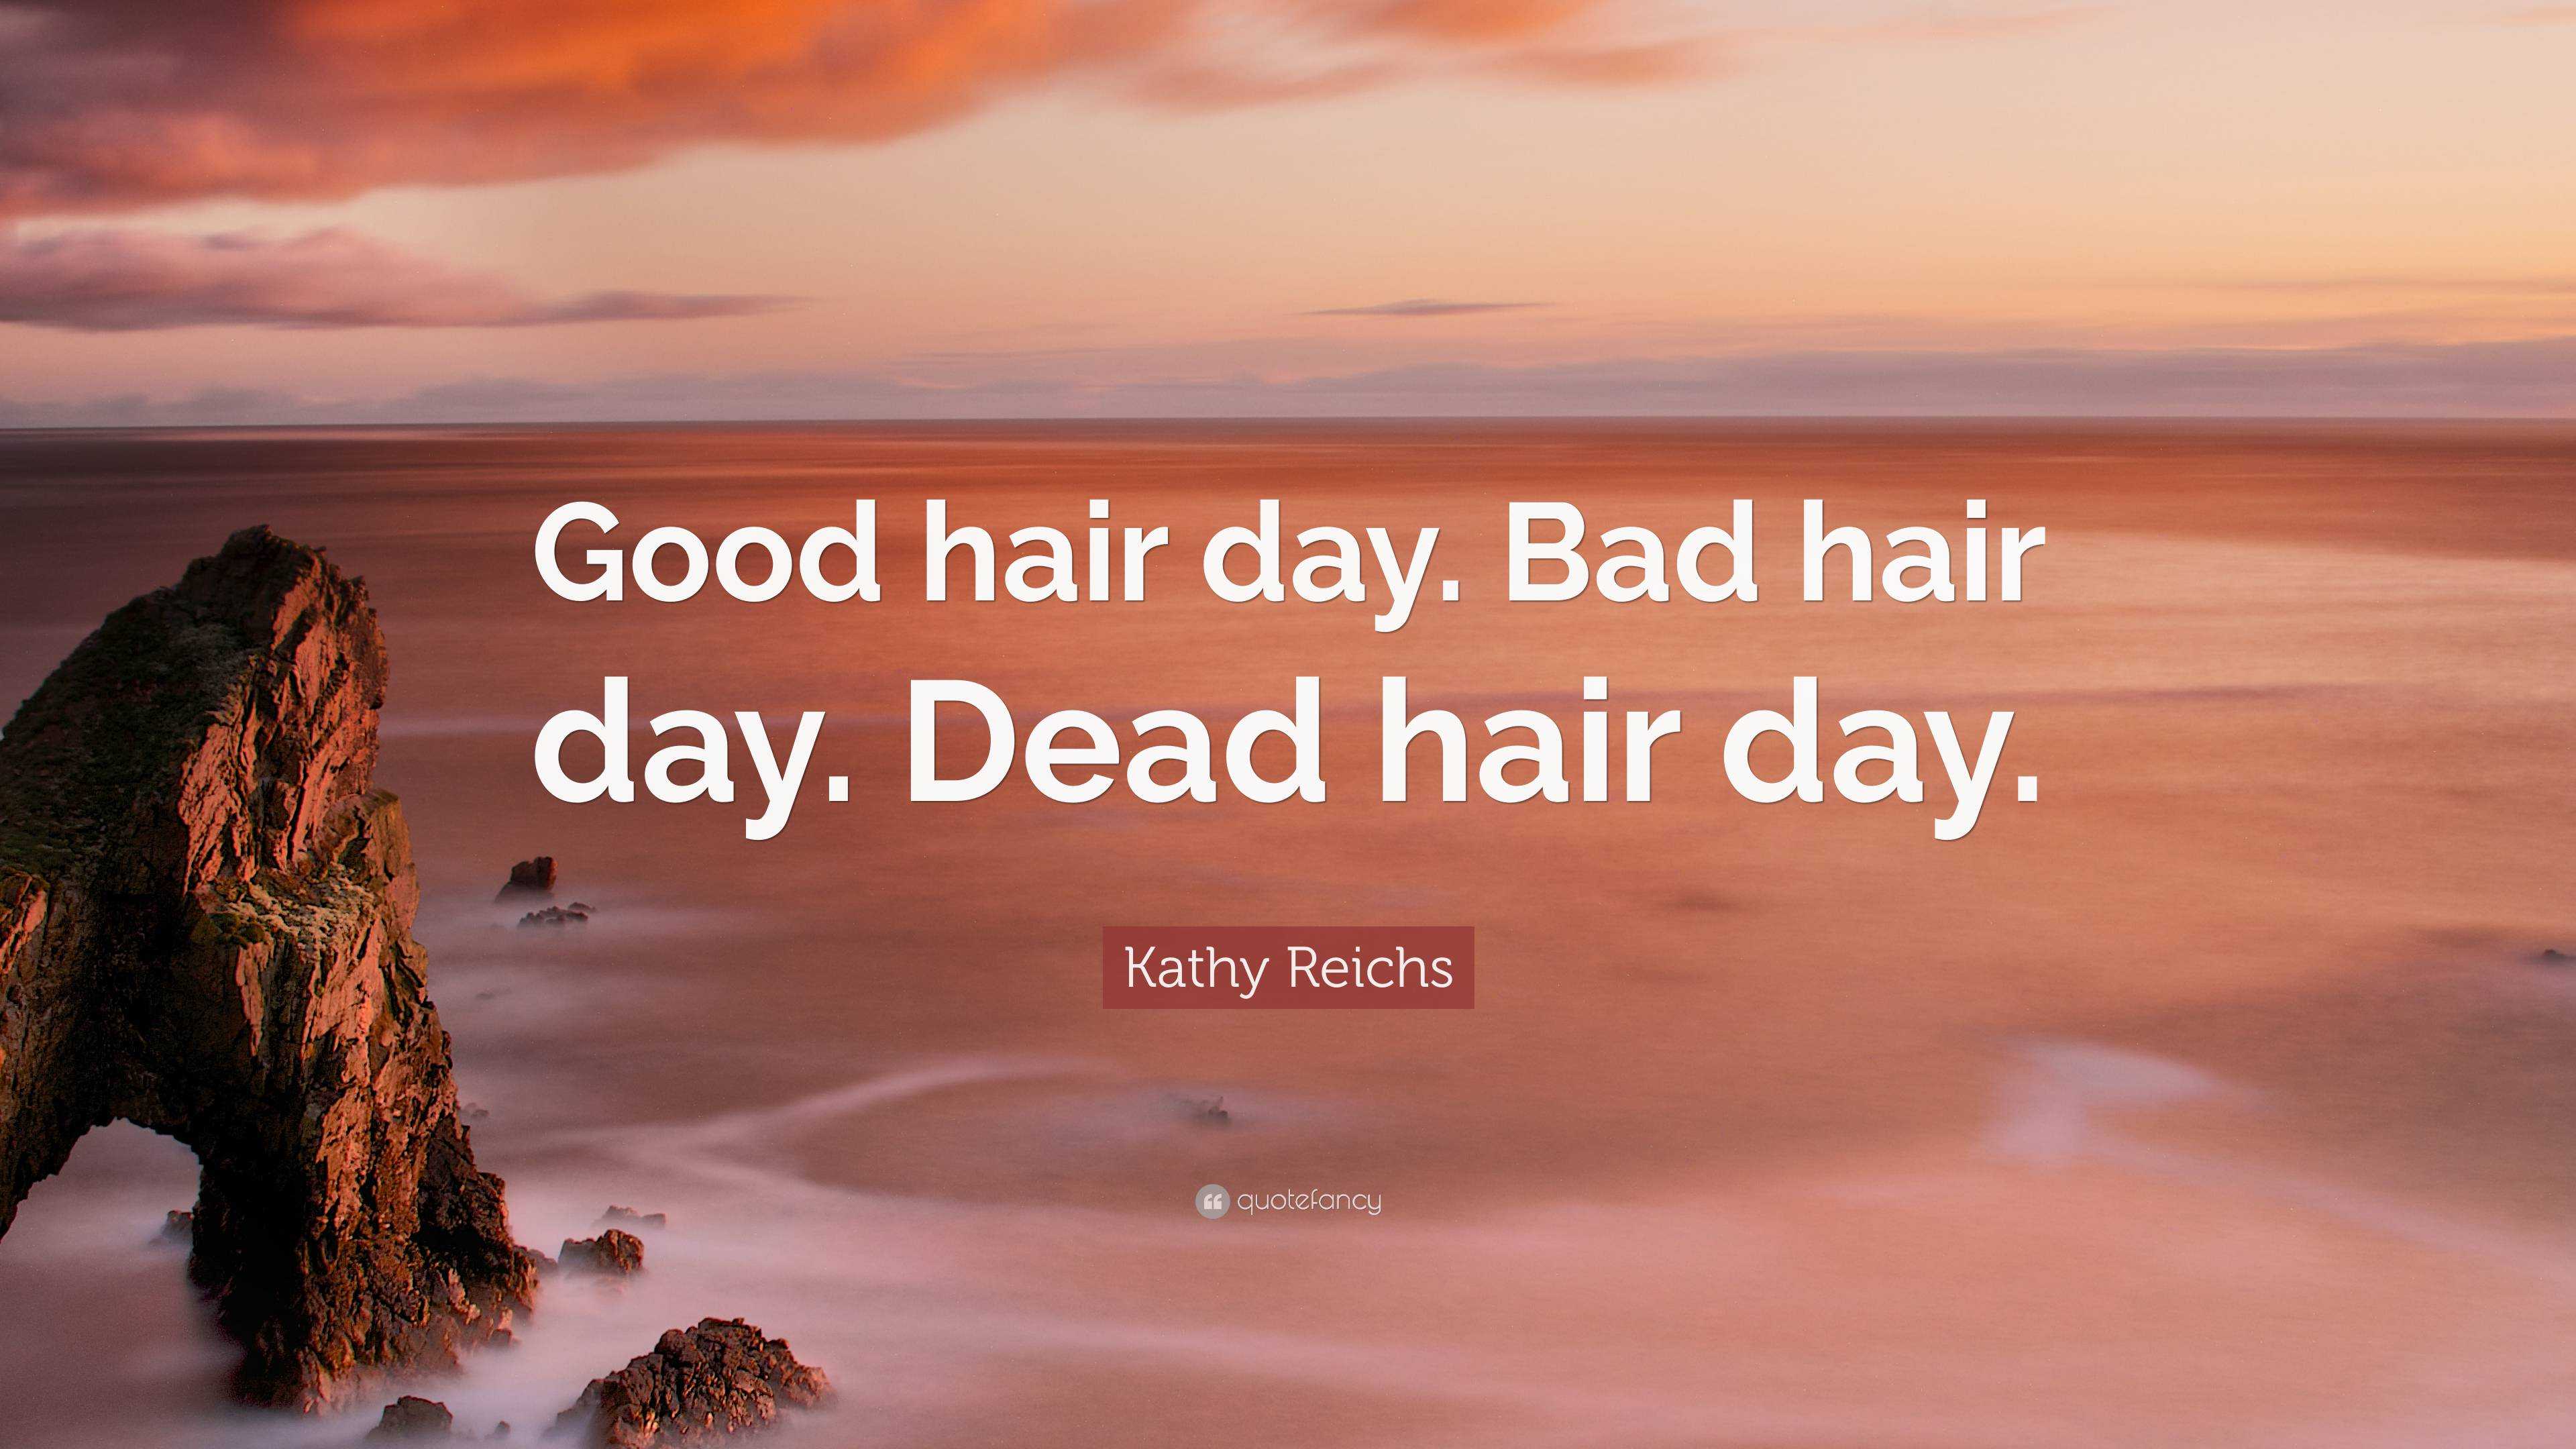 Kathy Reichs Quote: “Good hair day. Bad hair day. Dead hair day.”